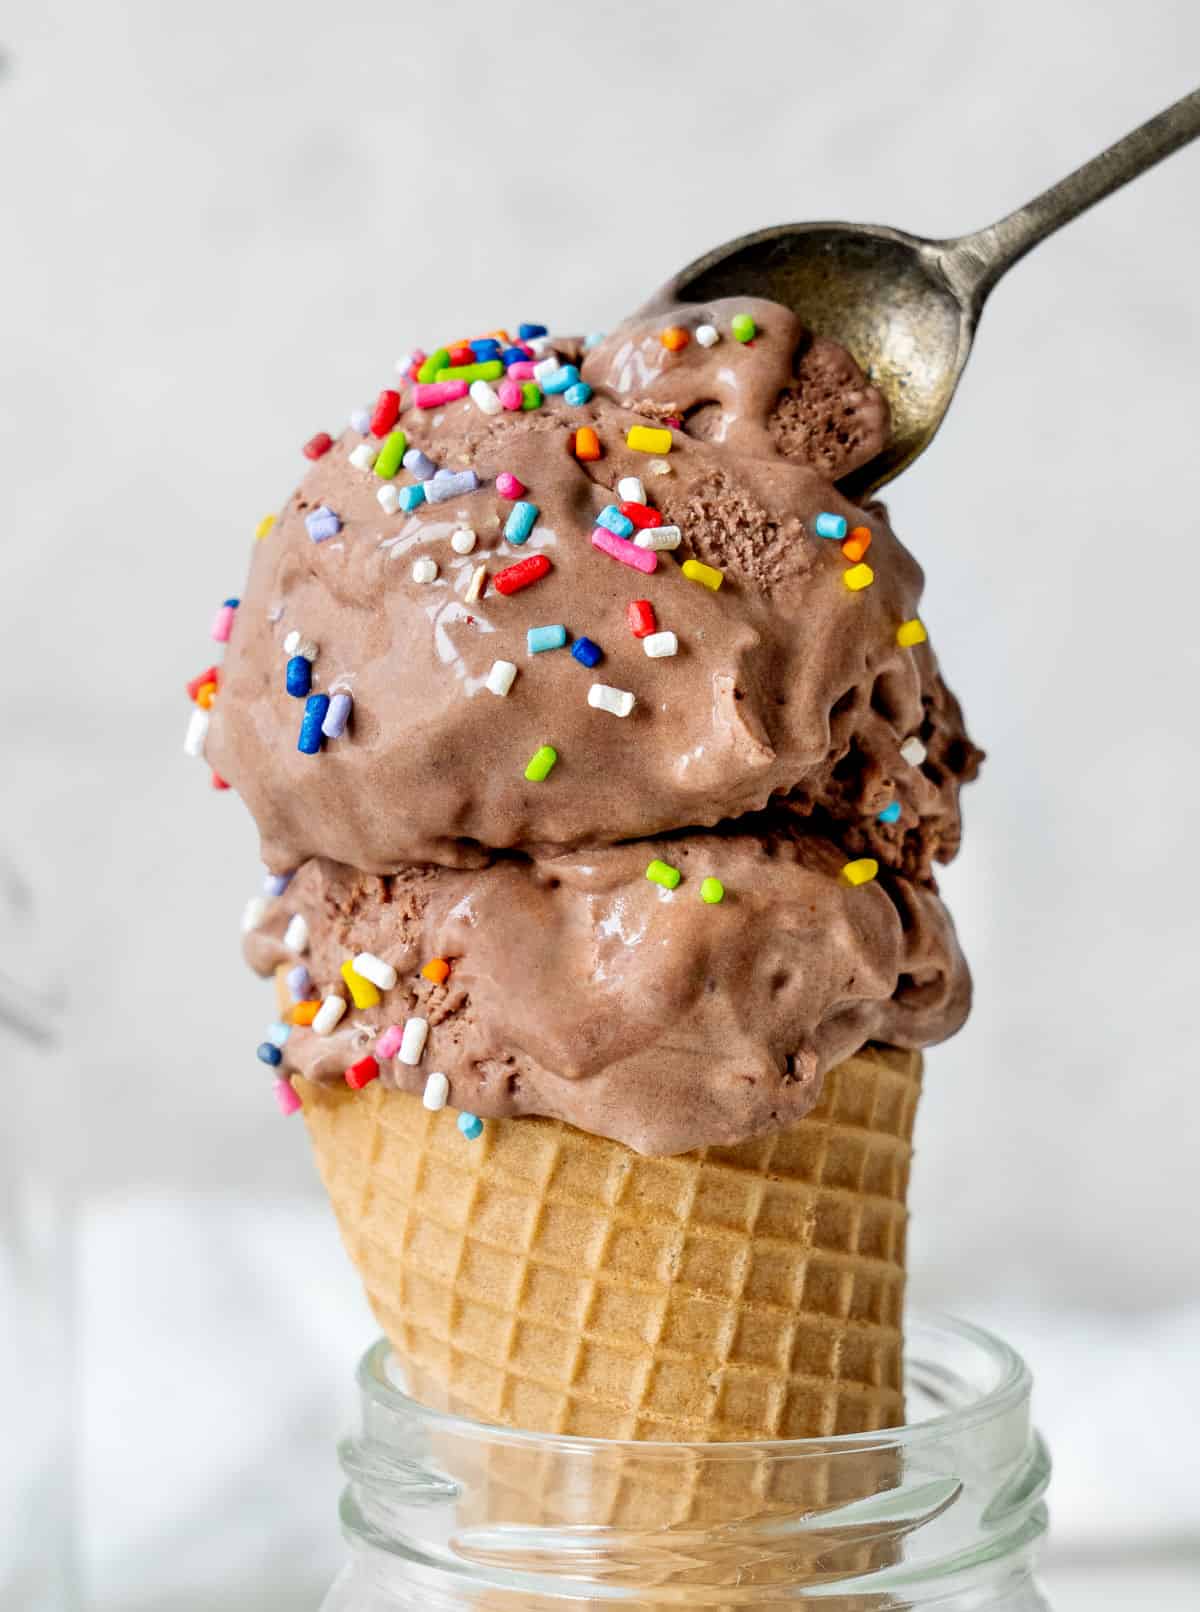 Spooning chocolate ice cream with sprinkles in a waffle cone. Light grey background. 